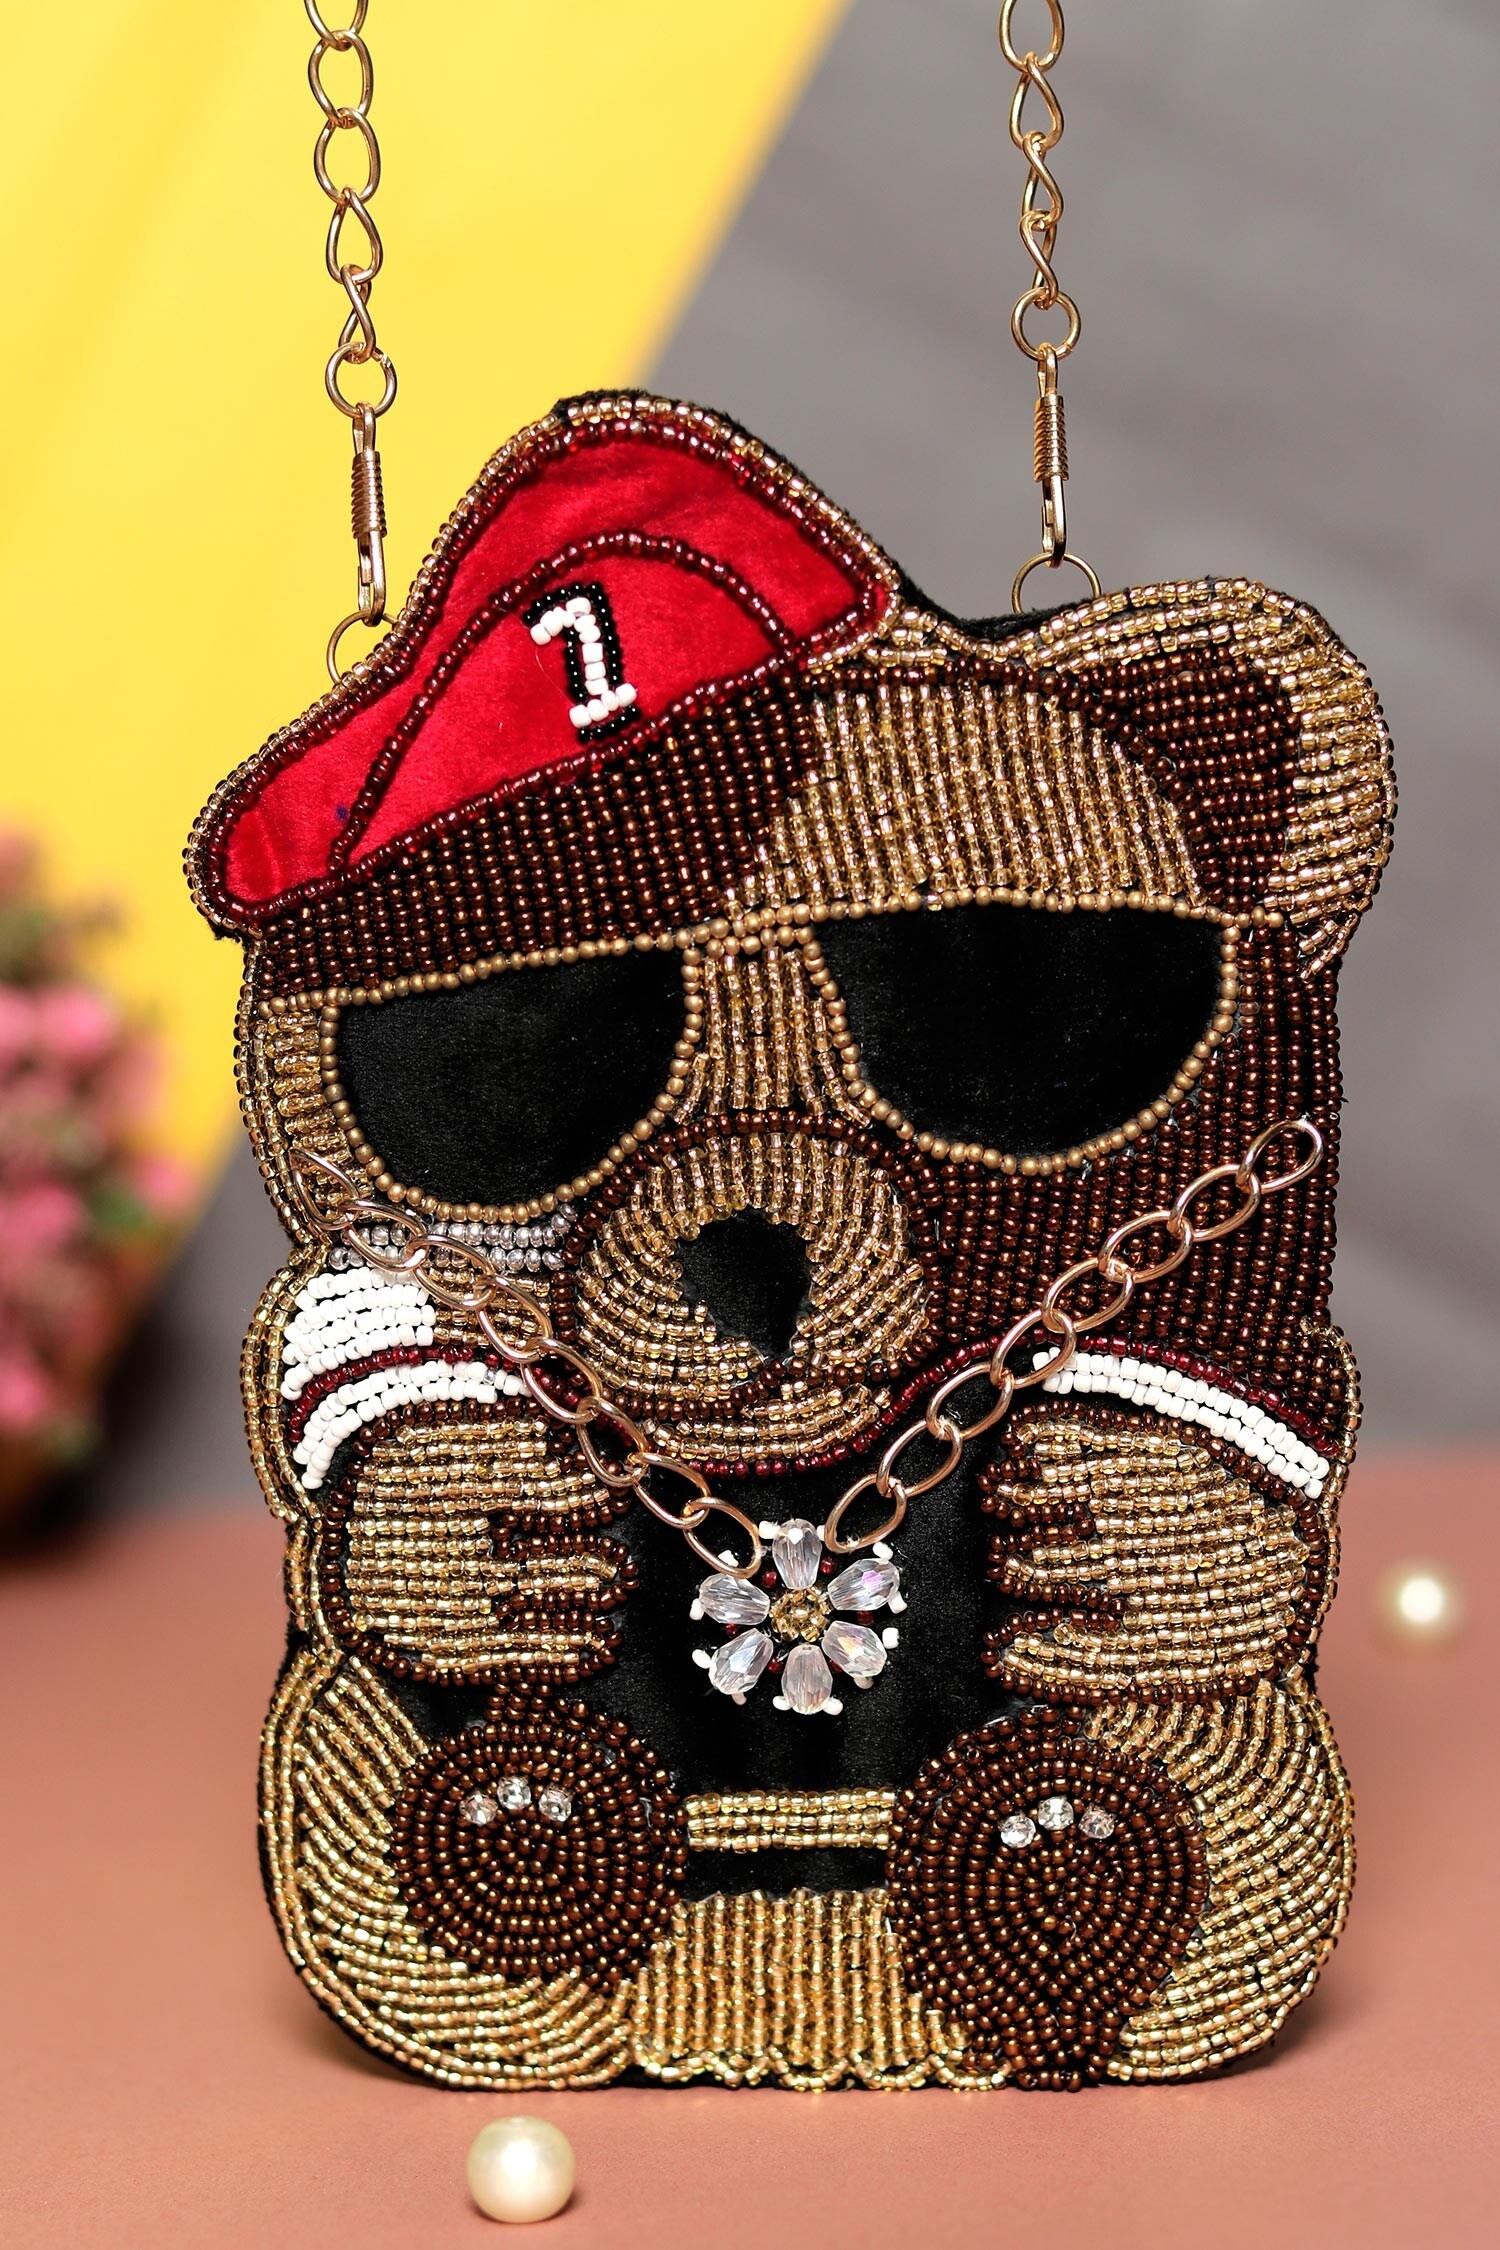 NR BY NIDHI RATHI Teddy Bear Embroidered Mobile Cover